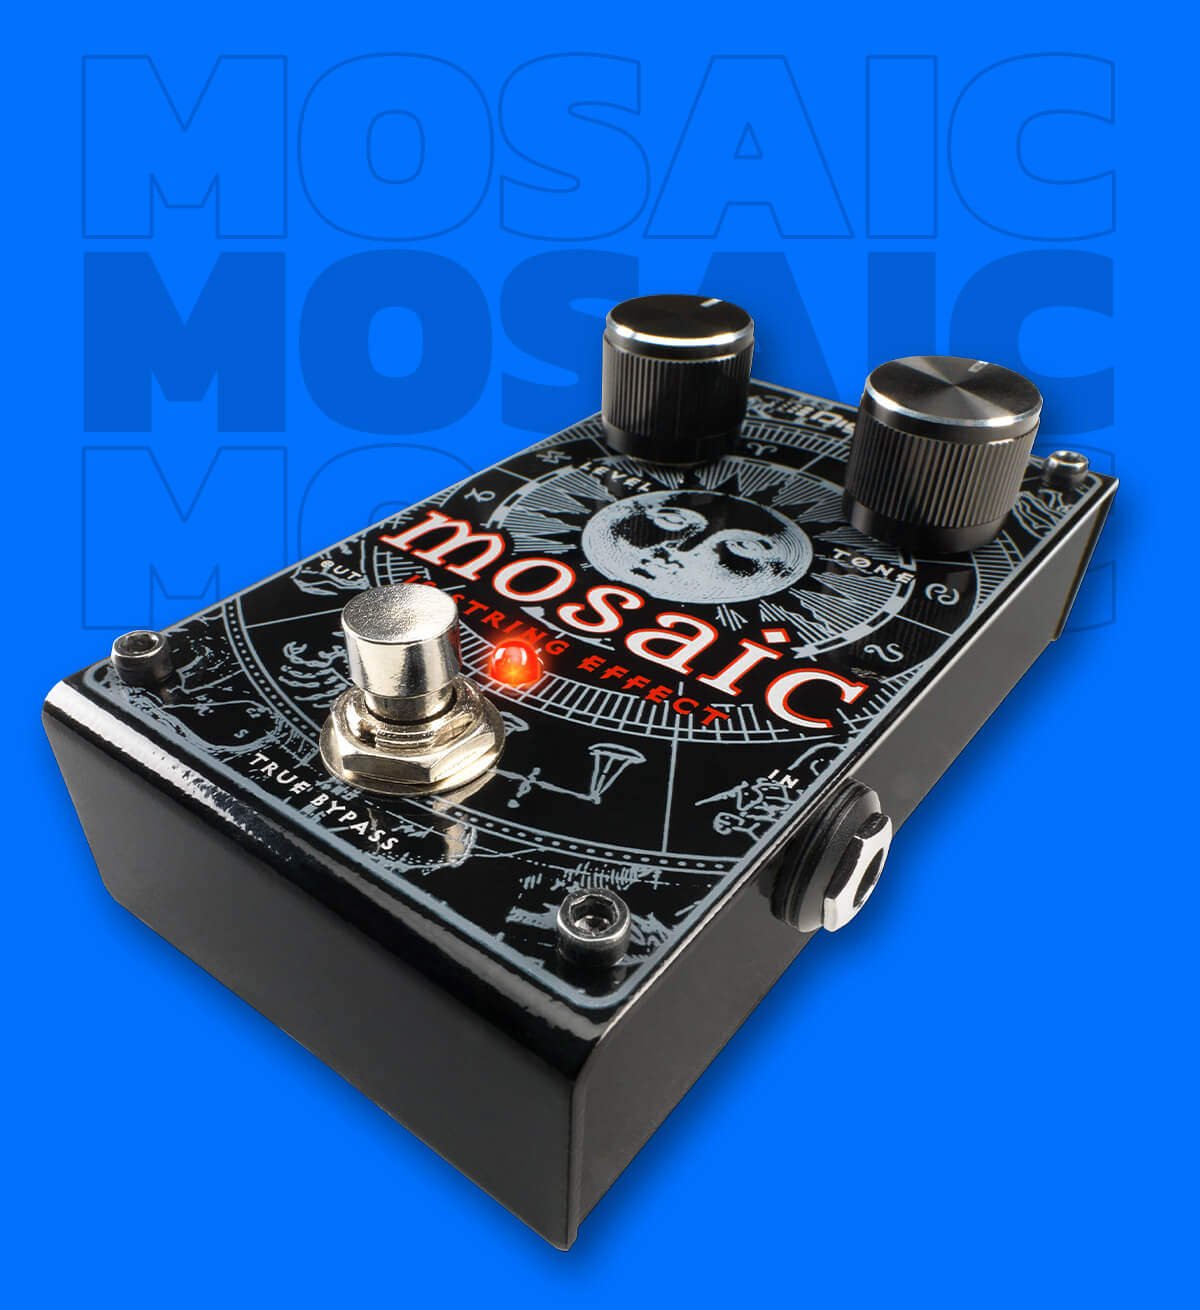 Digitech Mosaic polyphonic 12-string effect guitar pedal in black with gray graphics, blue background graphics that says 